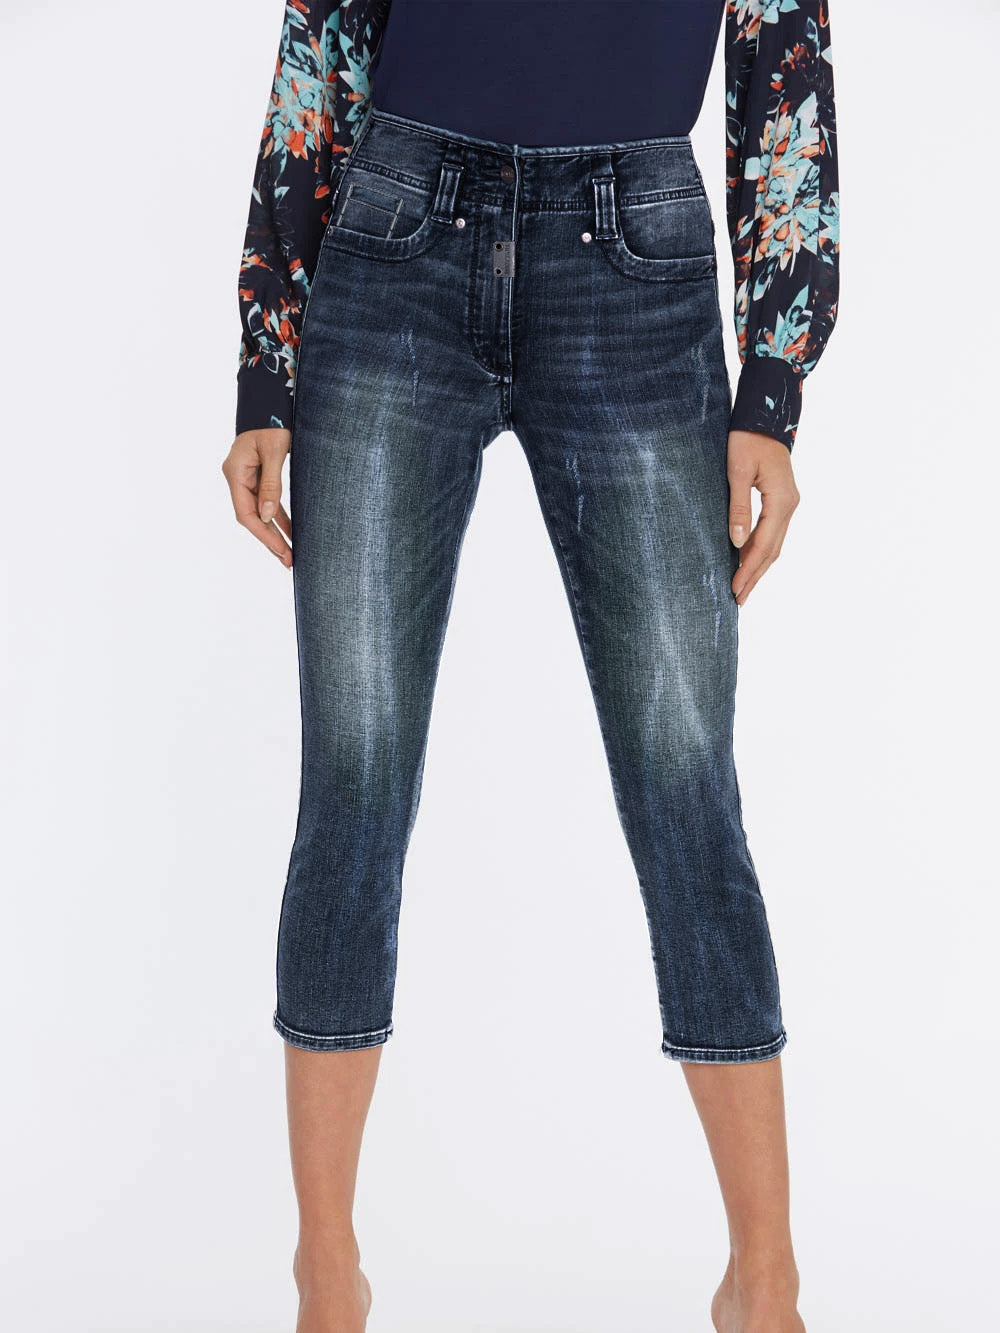 Time Zone Grinding Jeans Short For Ladies-Dark Navy Faded-BR146